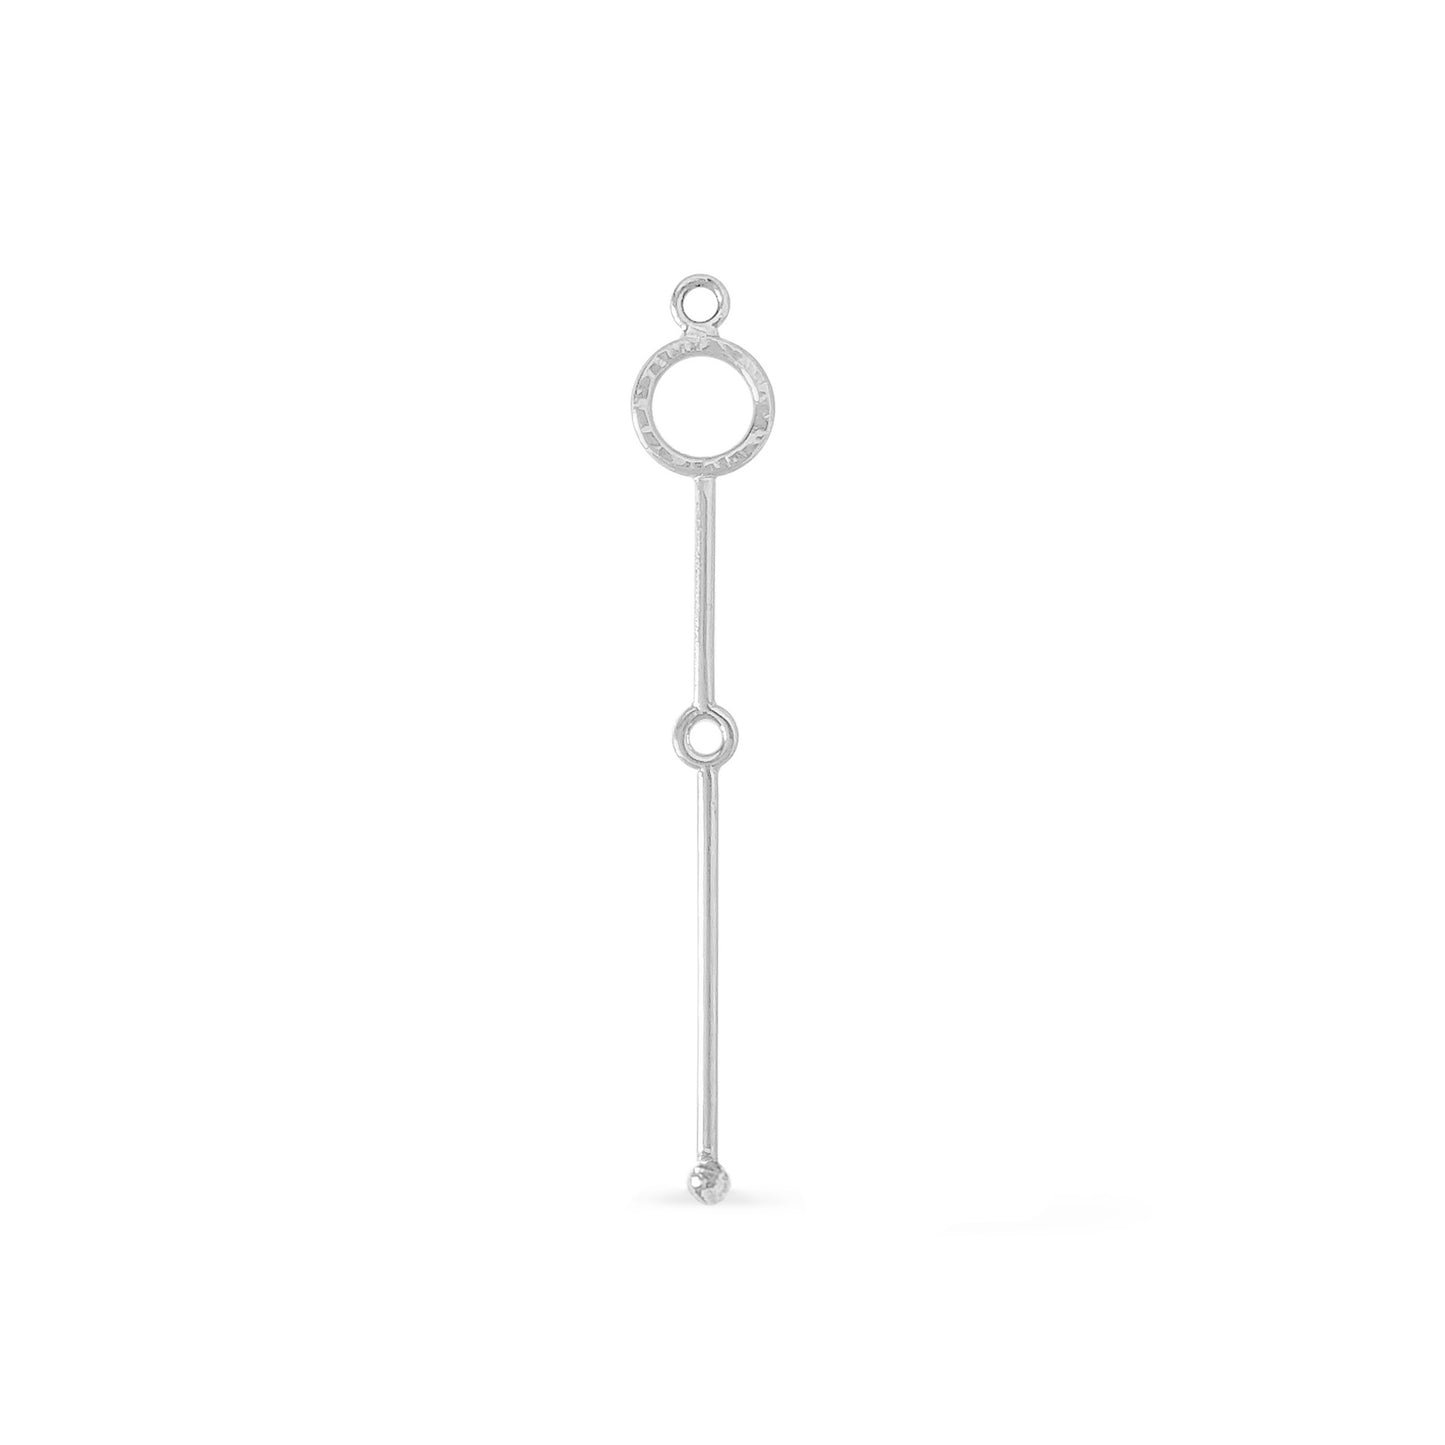 sterling silver circle and bar drop charm for earrings and necklaces